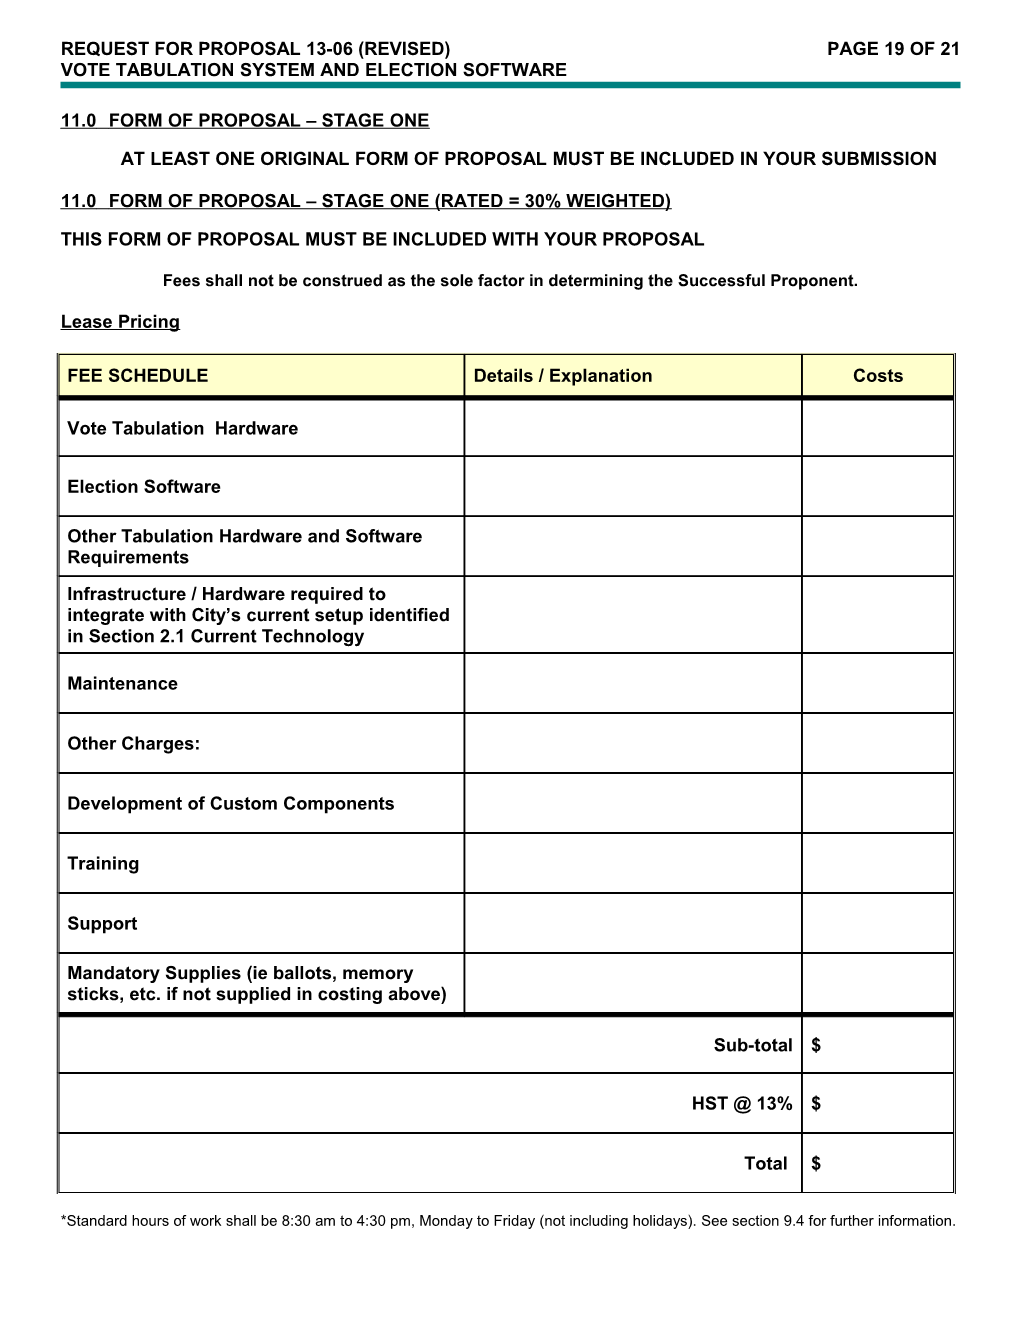 RFP13-06 Form of Proposal